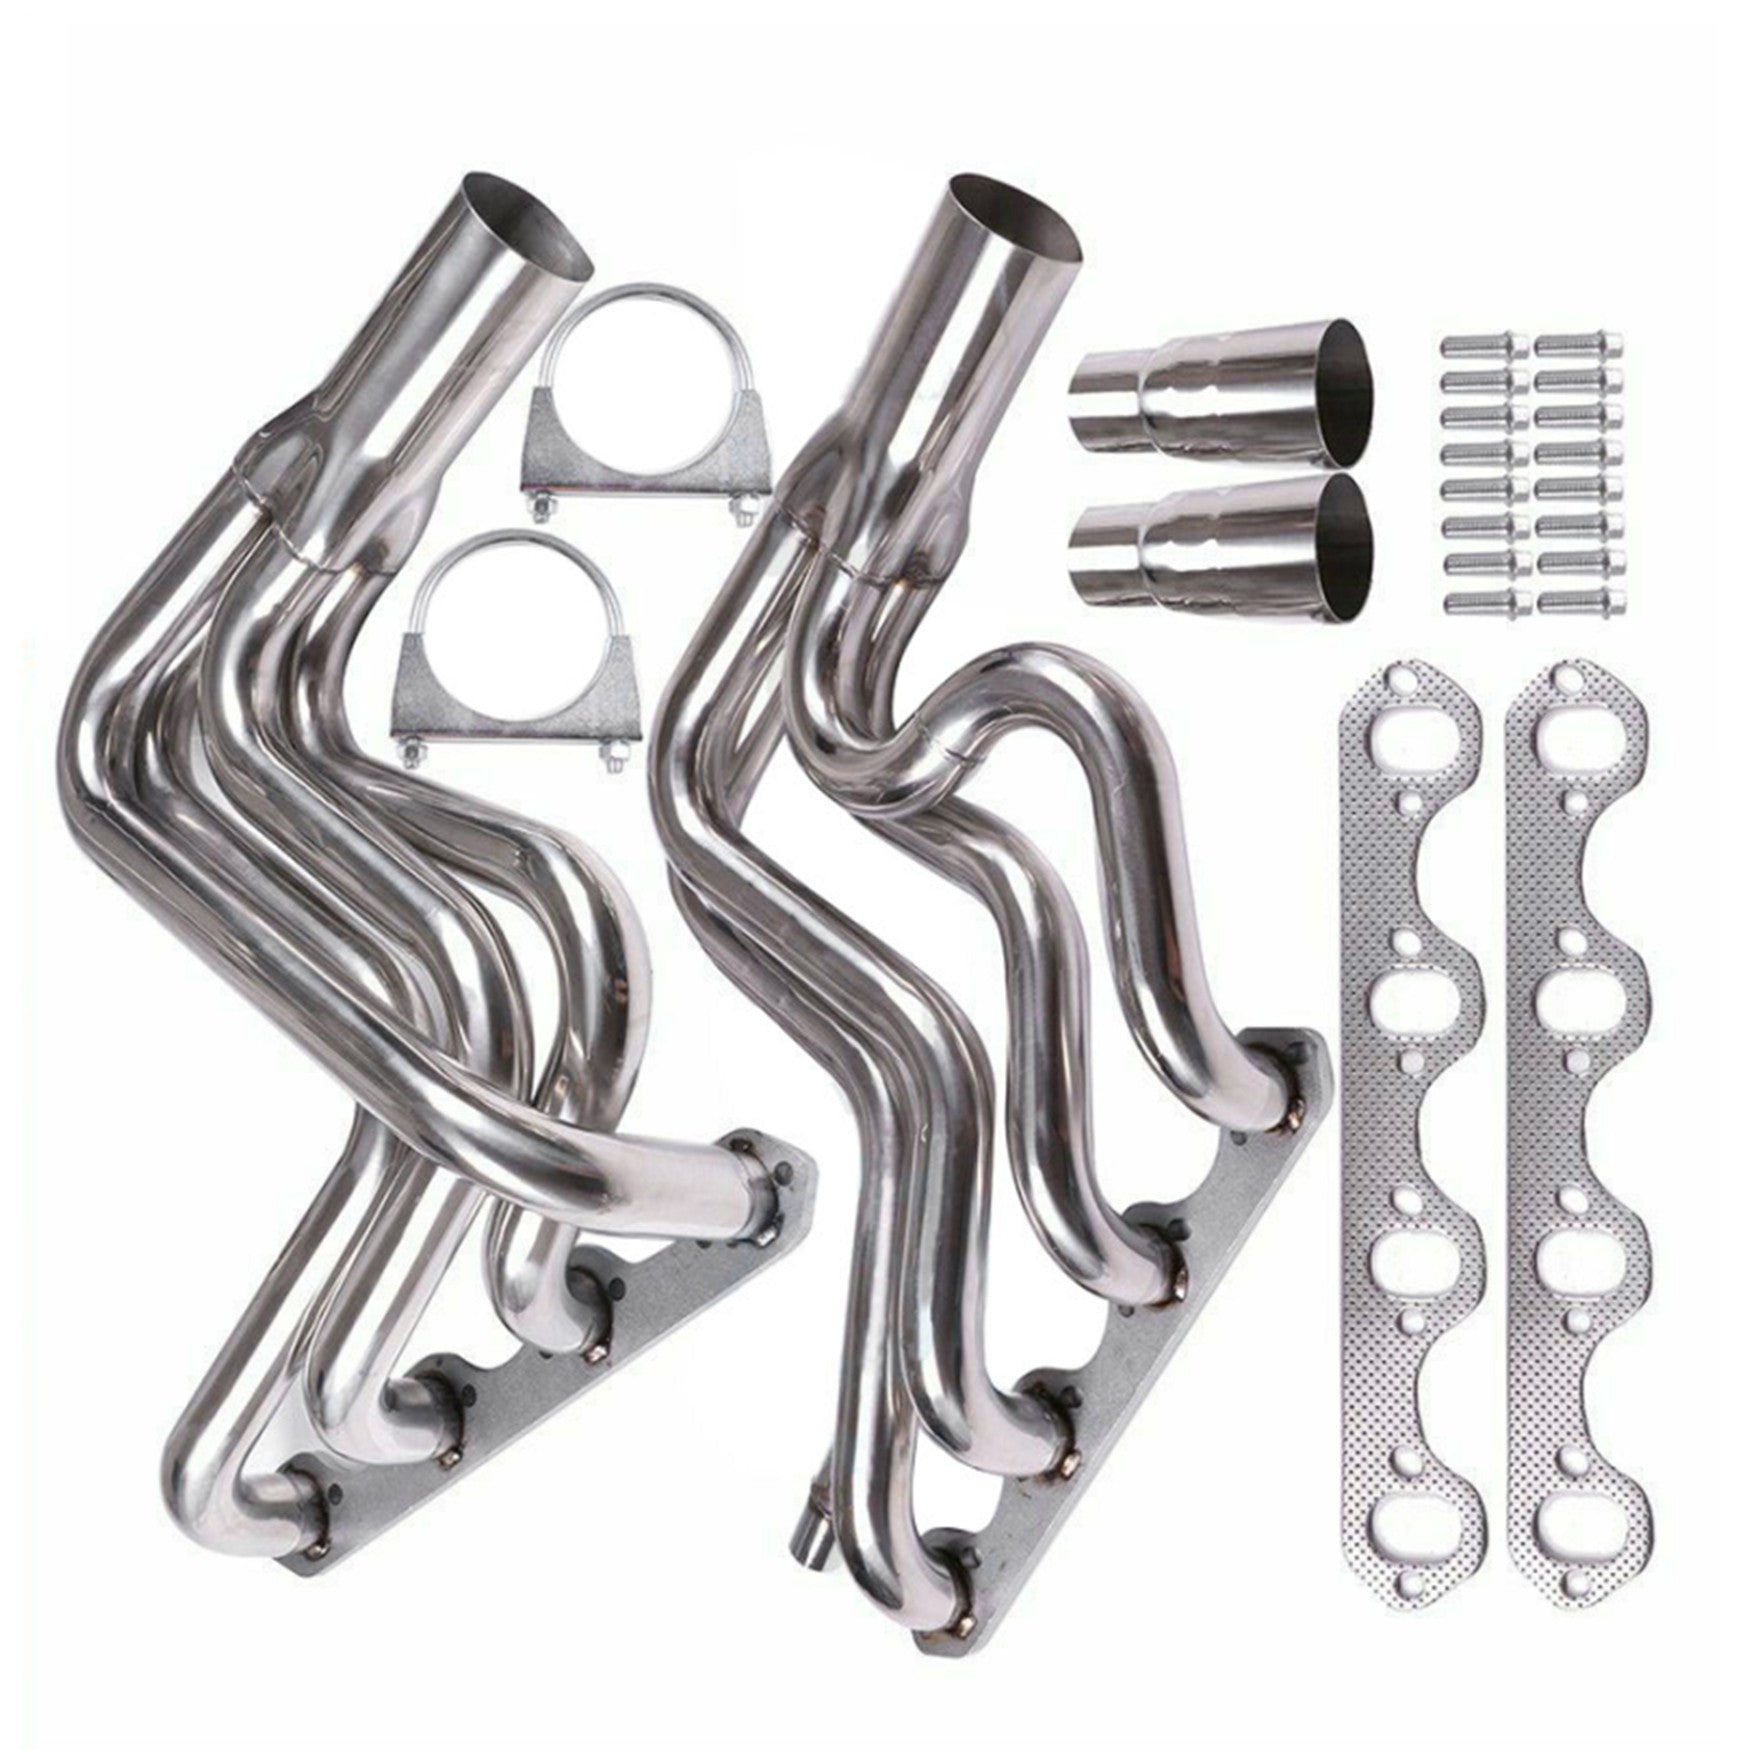 Stainless Steel Header Exhaust Manifold For 1989-1995 F150/F250/Bronco 5.8L